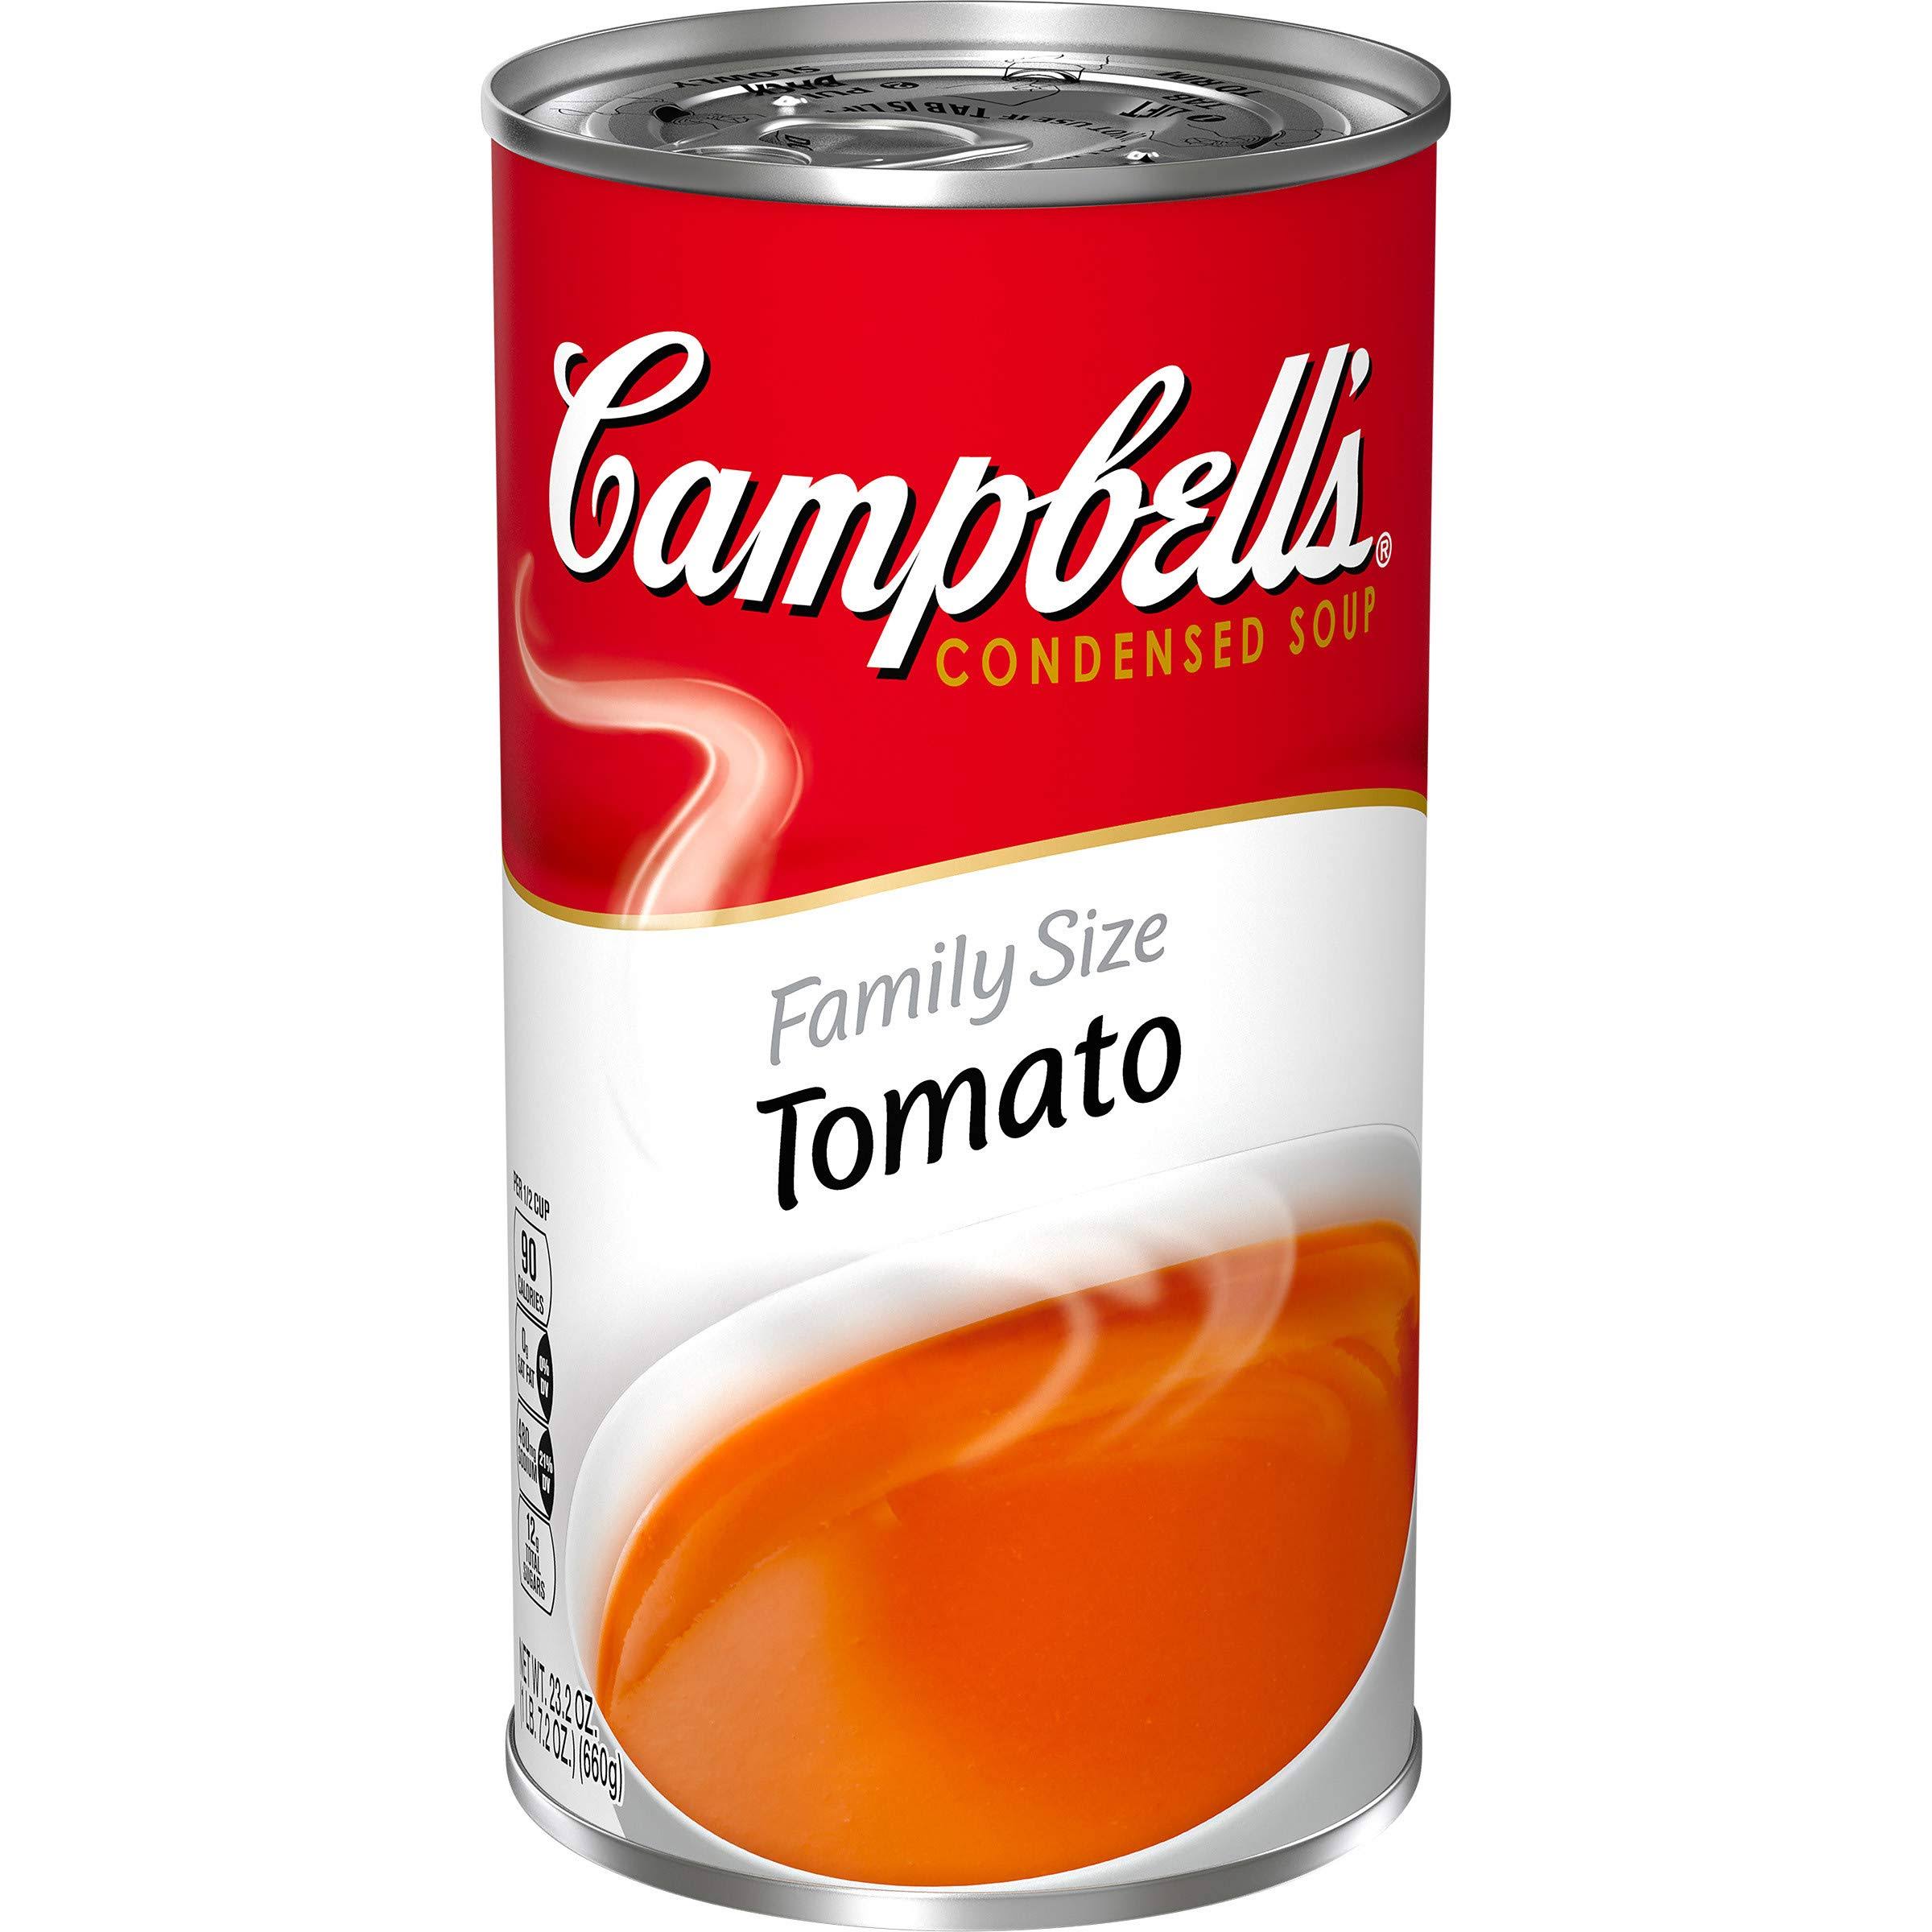 Campbell's Tomato Condensed Soup - Family Size, 23.2oz